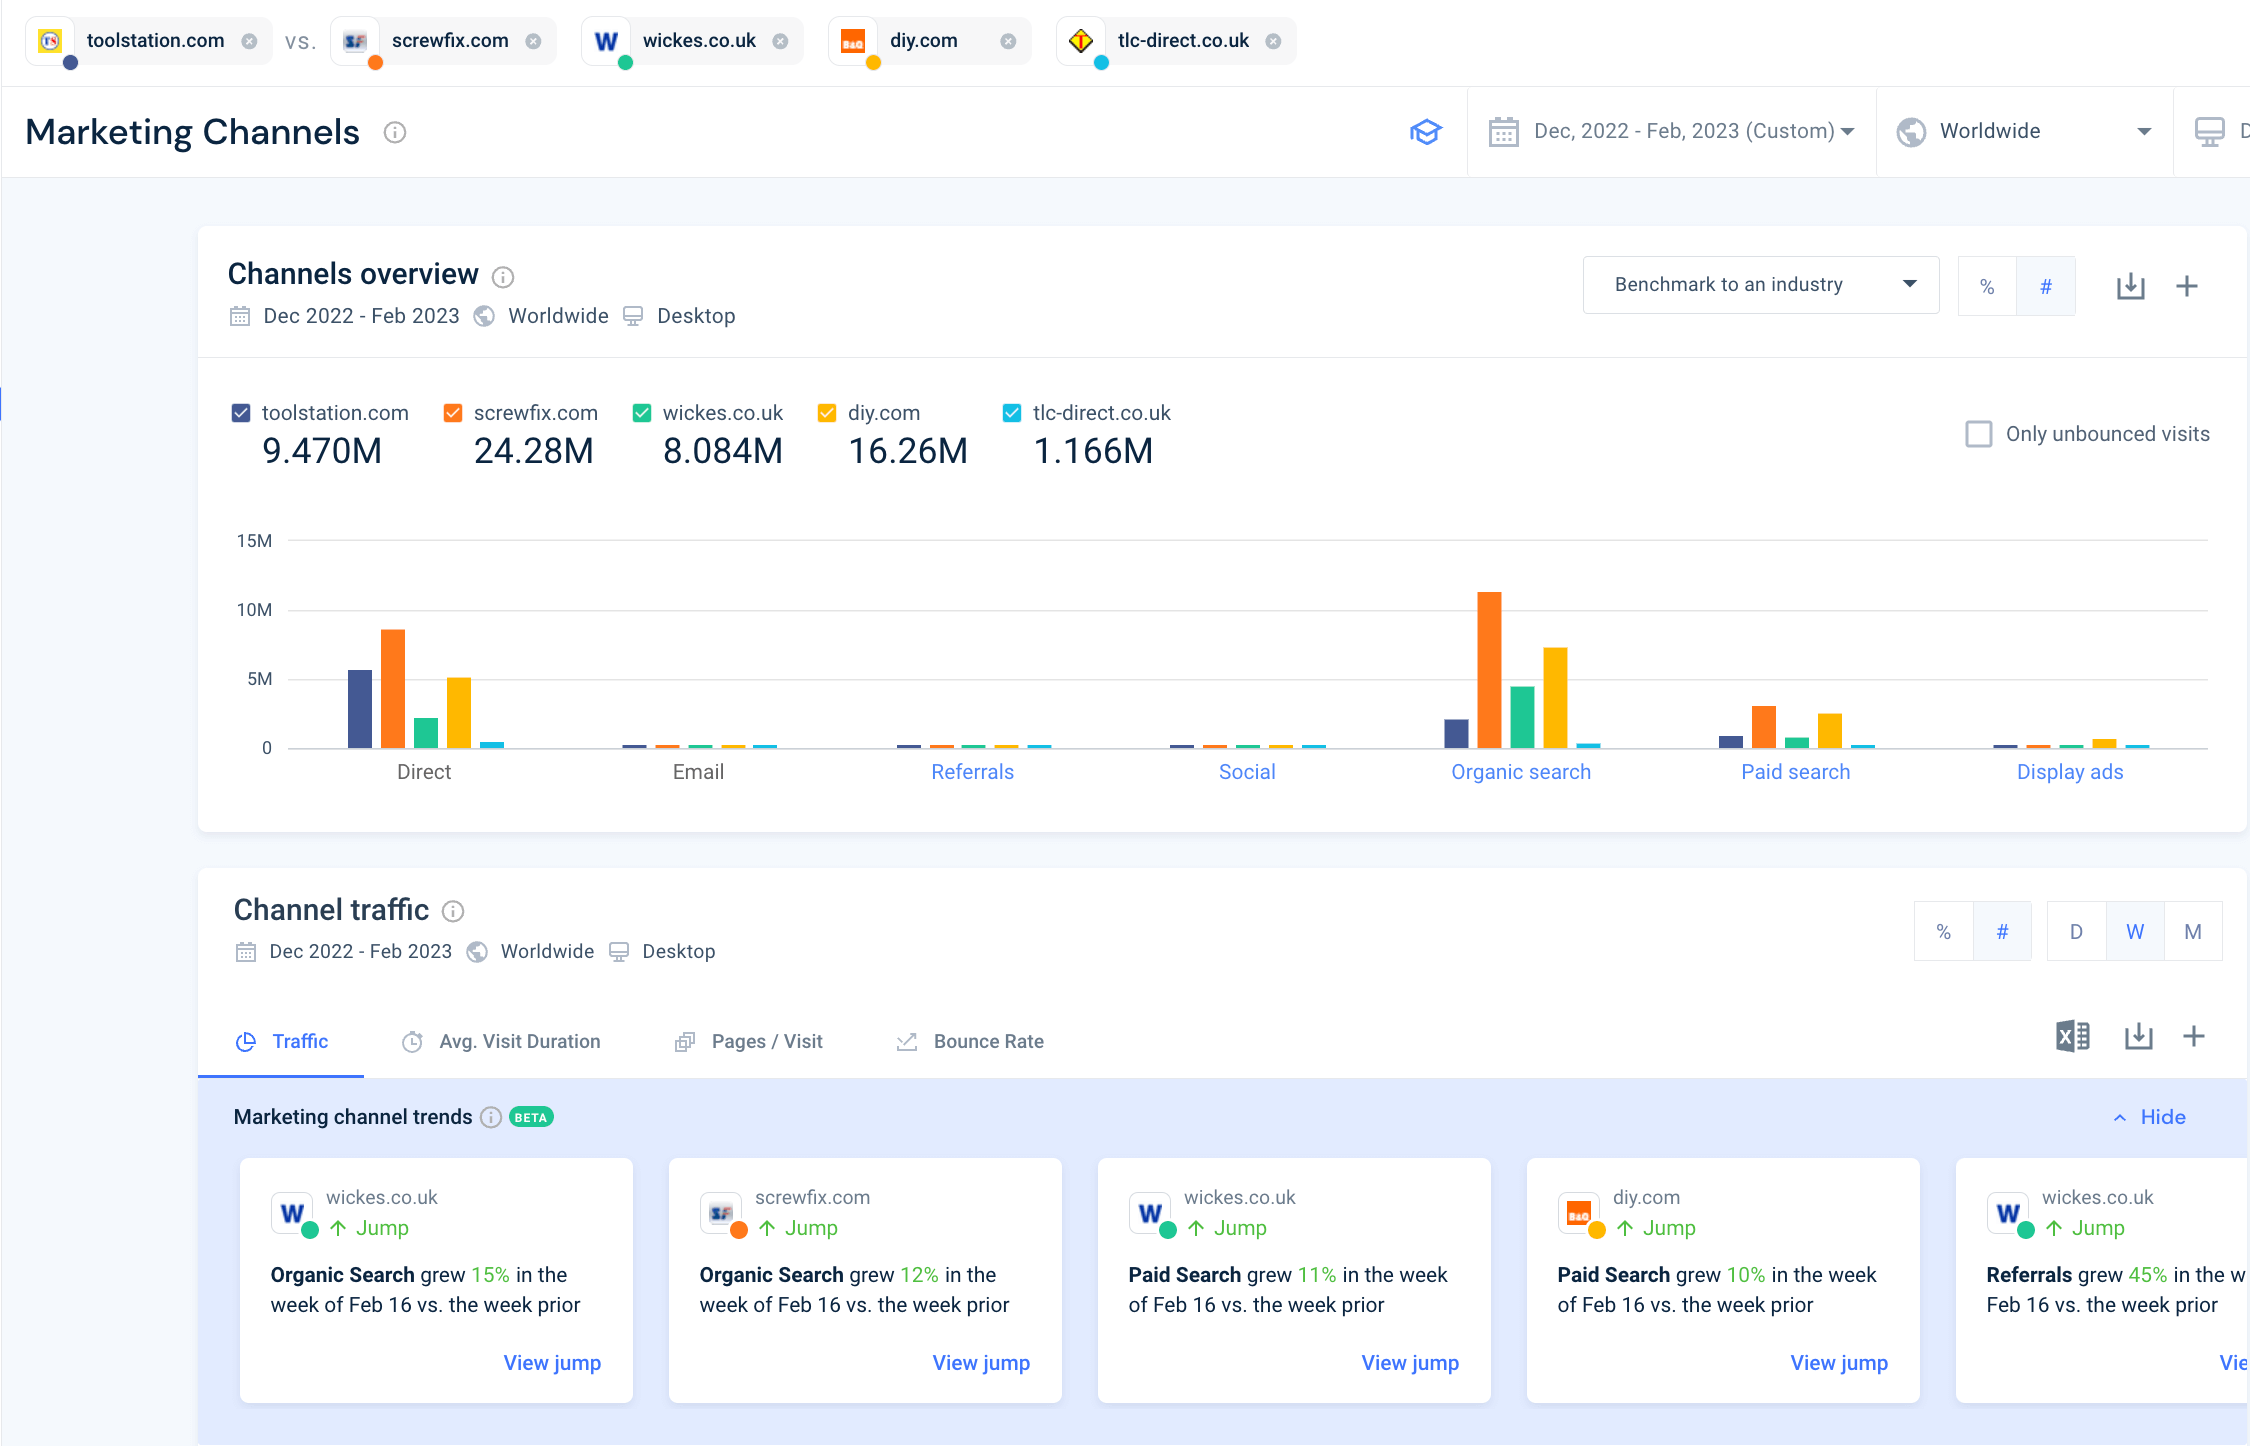 A comparison of Toolstation's performance against its four top competitors in the UK according to the Similarweb Marketing Channels.